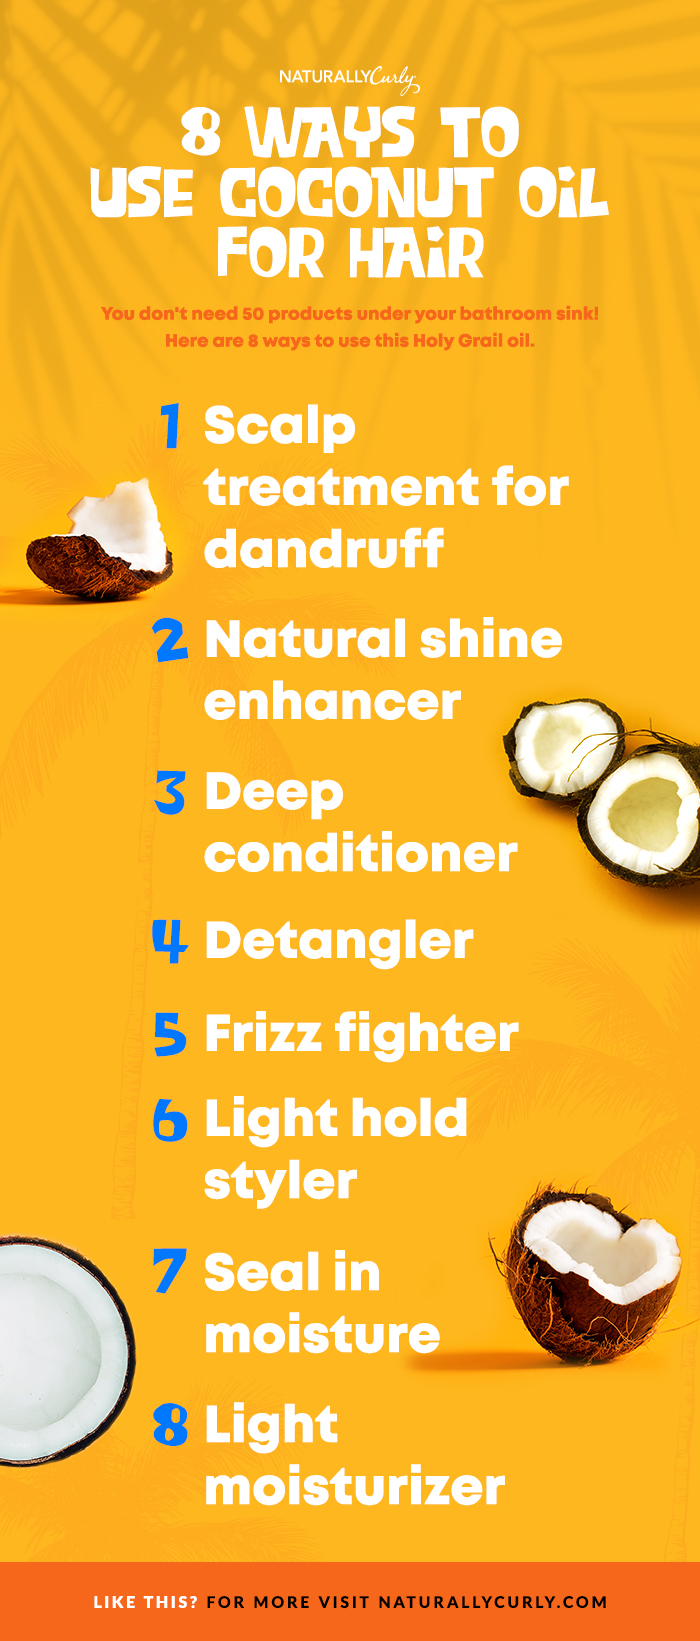 8 Ways to Use Coconut Oil for Hair